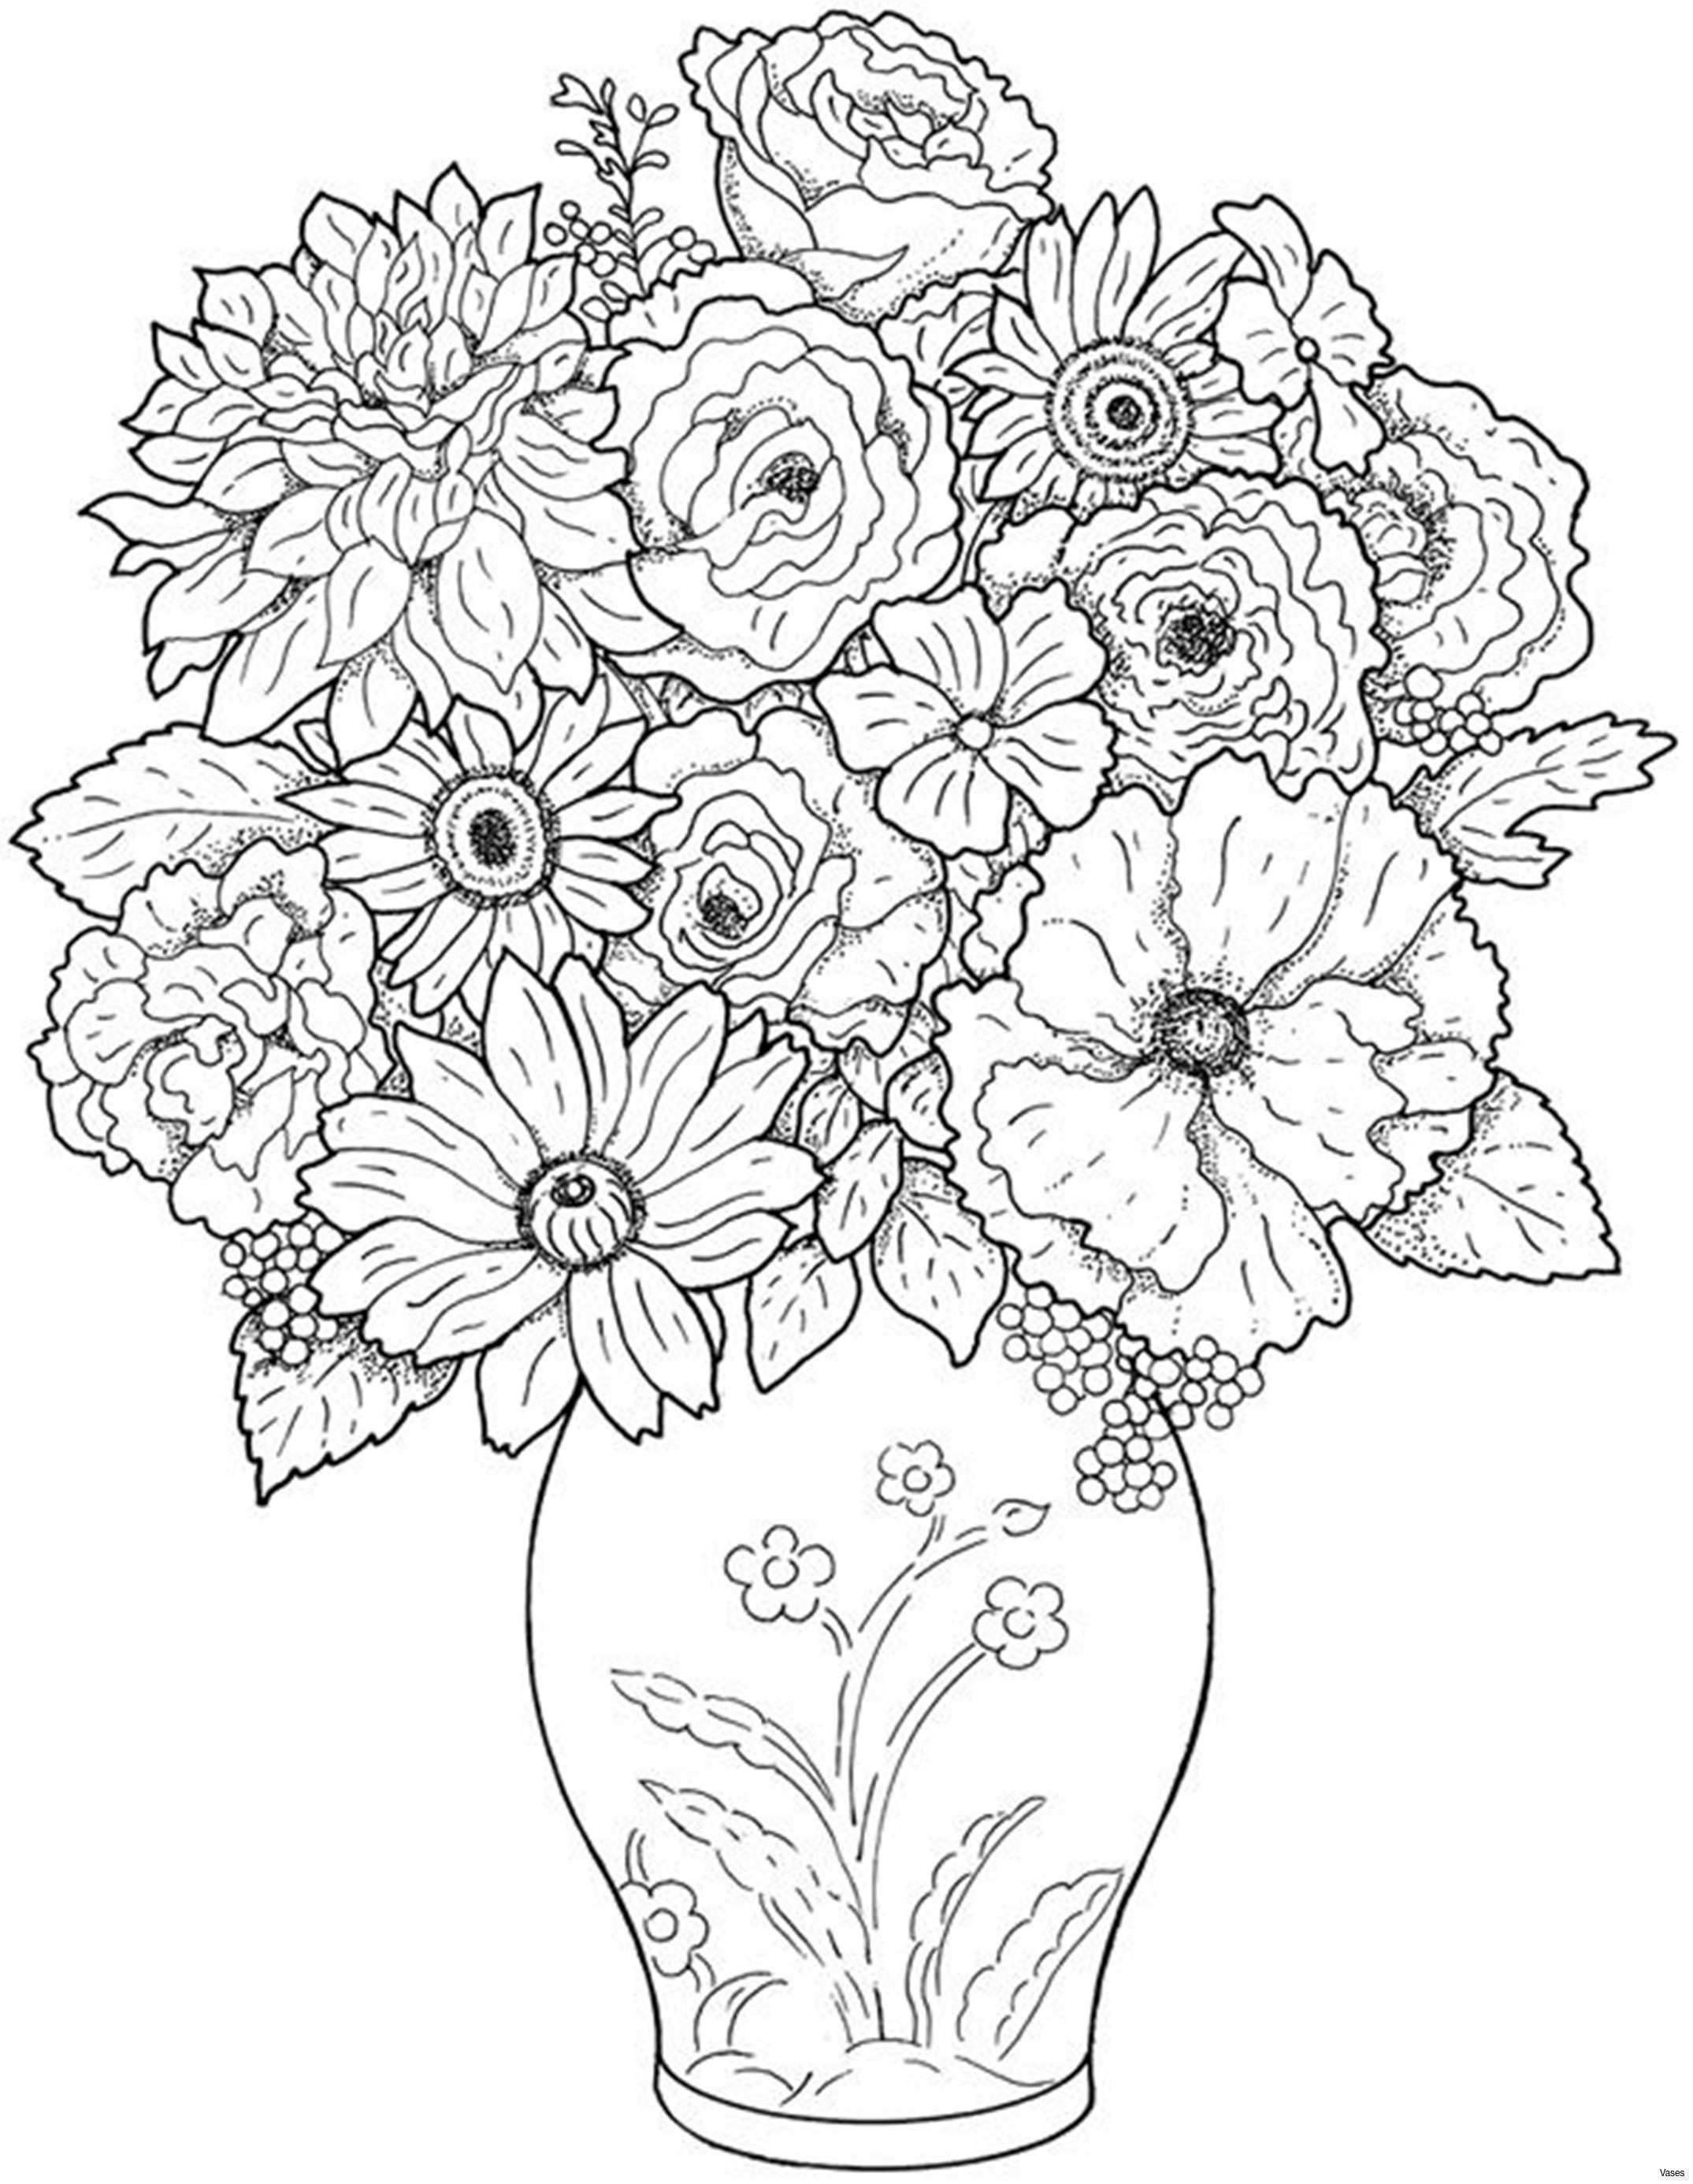 28 Unique Black Bud Vase 2024 free download black bud vase of inspiration types of bouquet flowers from h vases bud vase flower regarding amazing types of bouquet flowers from best vases flower vase coloring page pages flowers in a